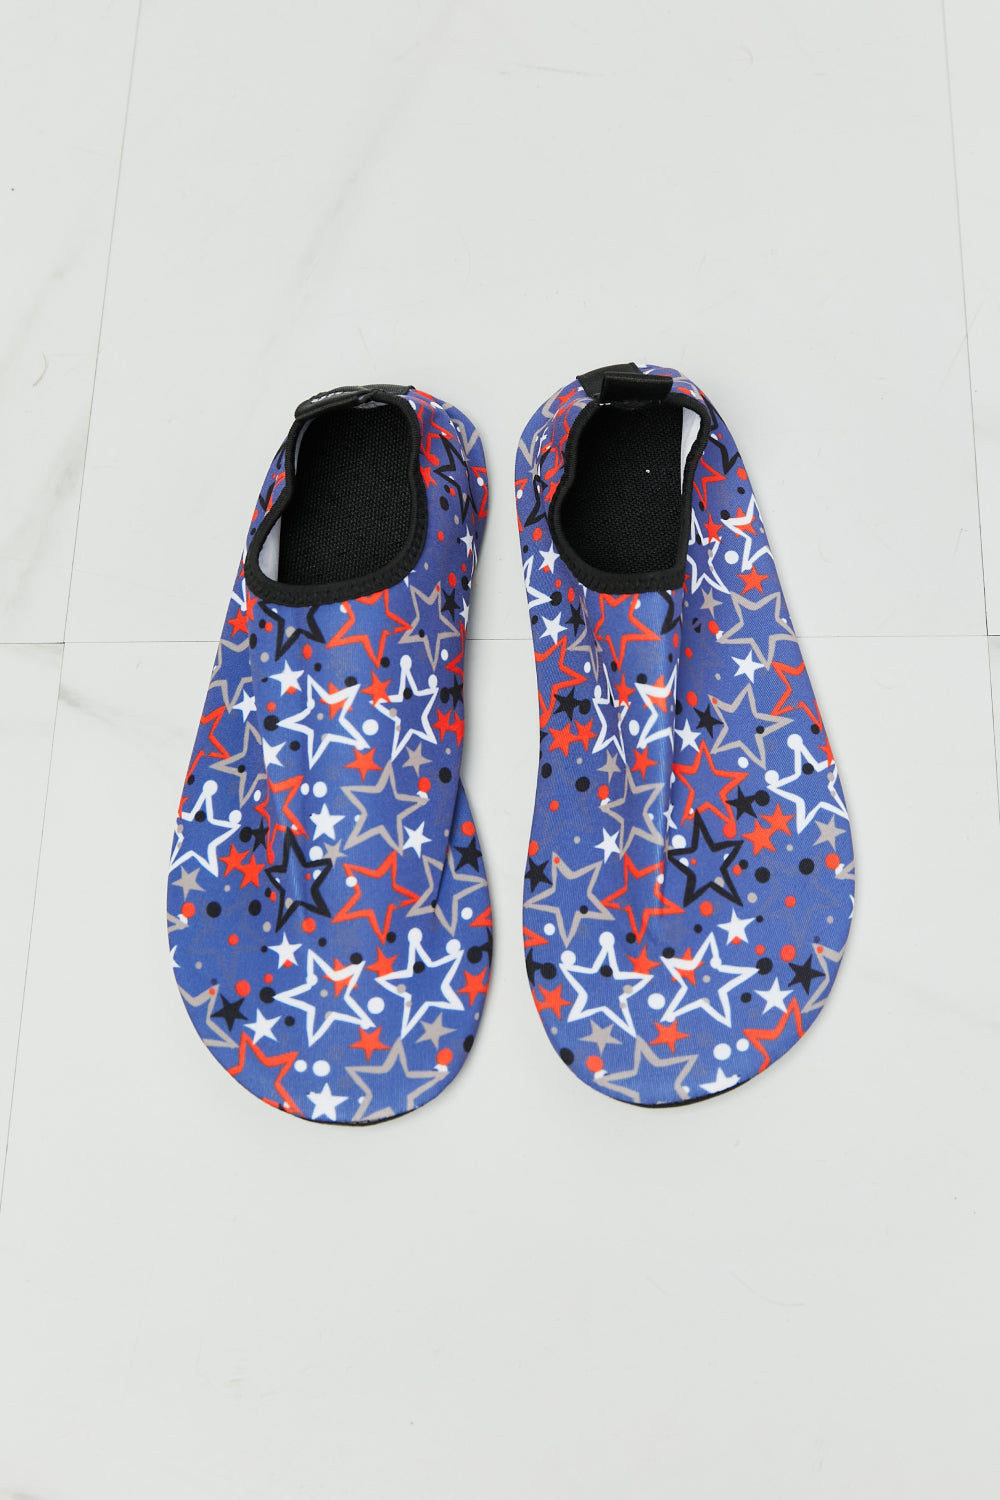 On The Shore Water Shoes in Navy USA Stars